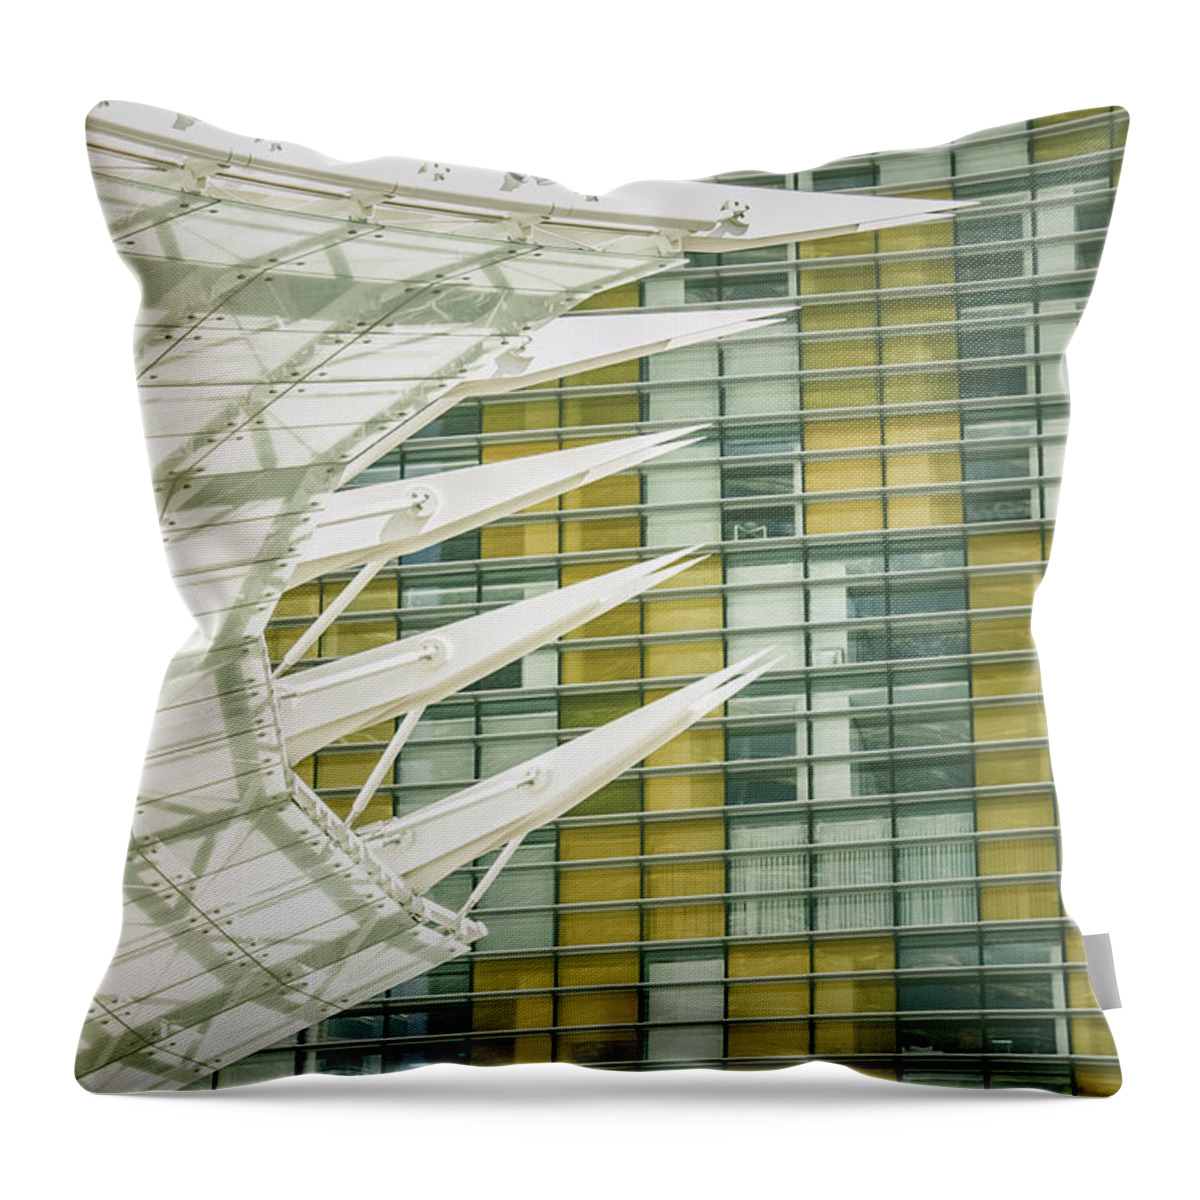  Throw Pillow featuring the photograph Angle by Bobby Villapando